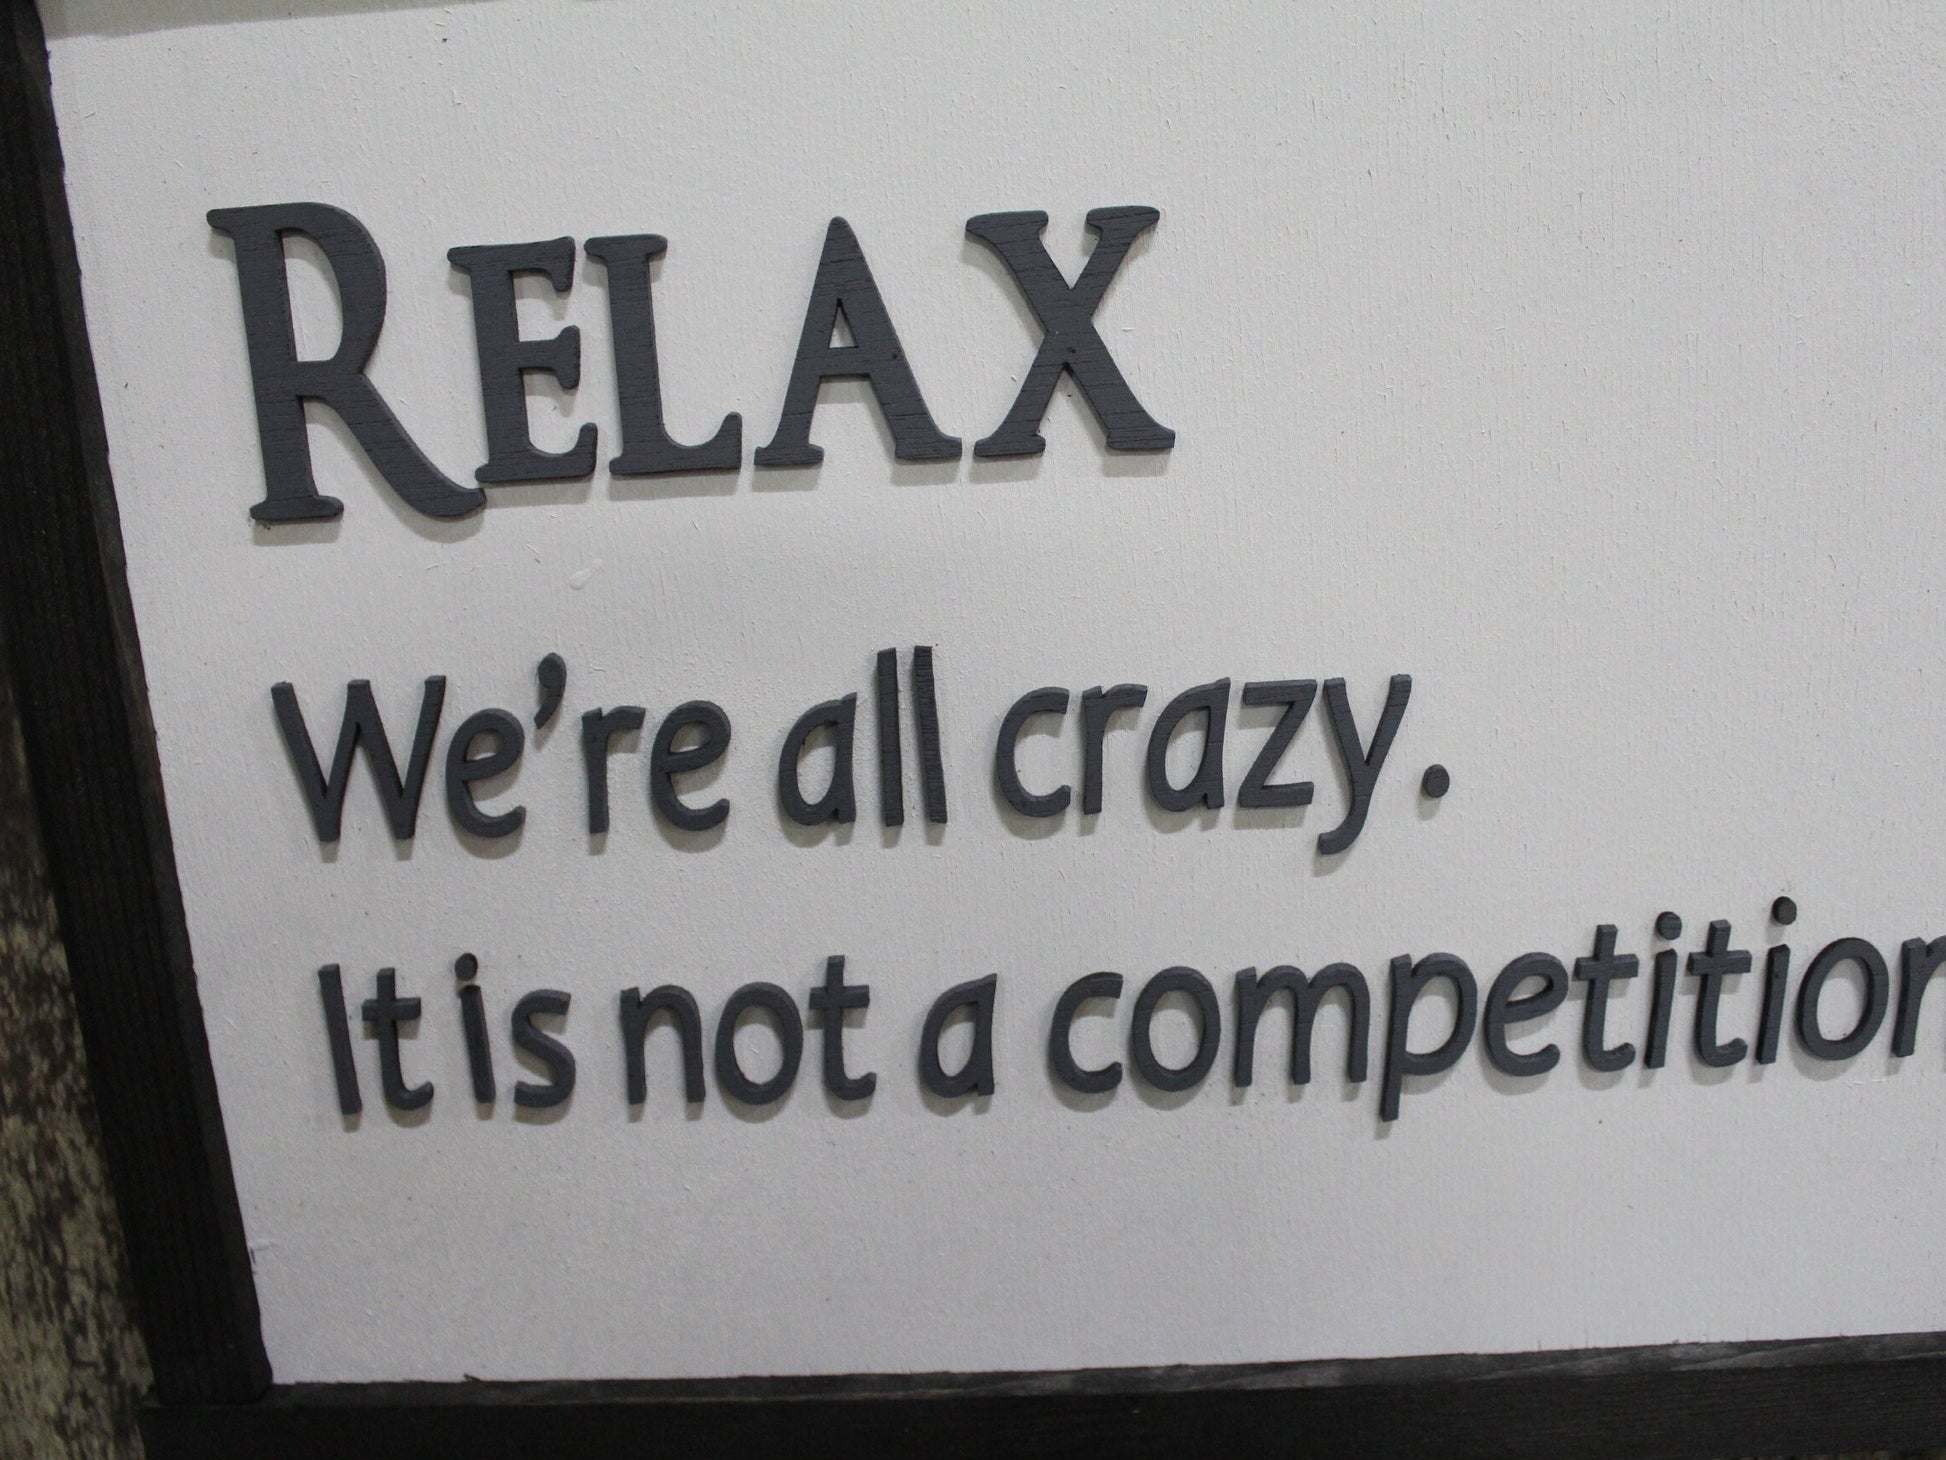 Relax We're All Crazy It's not a Competition Wood Sign Snarky Silly Wall Decoration Raised Text Nuts Weirdo Friend Gift Farmhouse Rustic